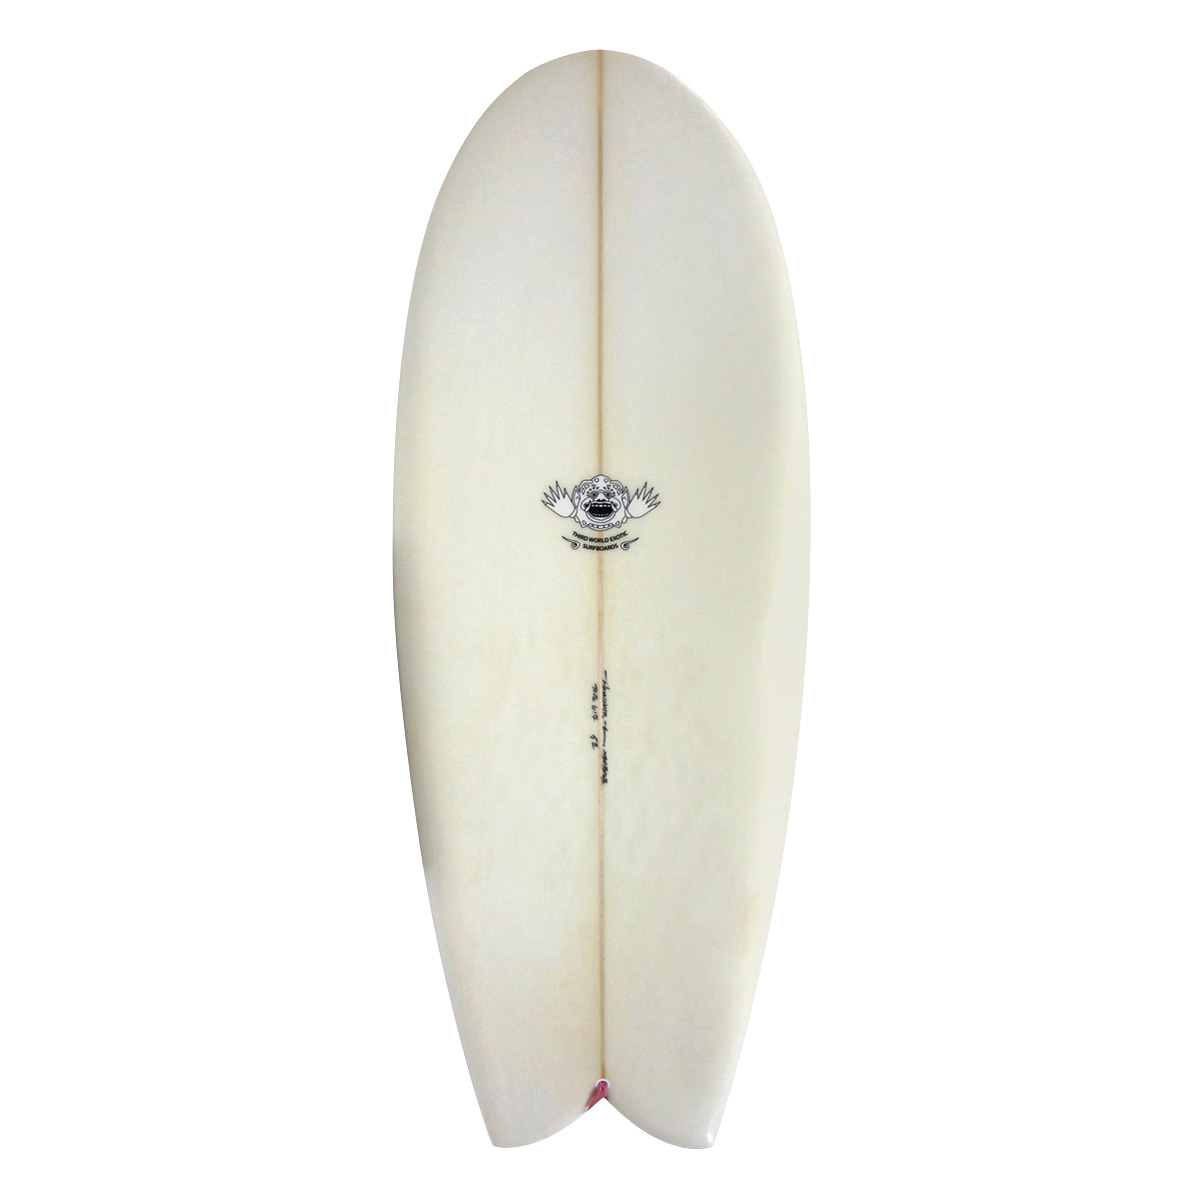  / LARRY MABILE SURFBOARDS / 5`2 Mini Simmons Fish Tail